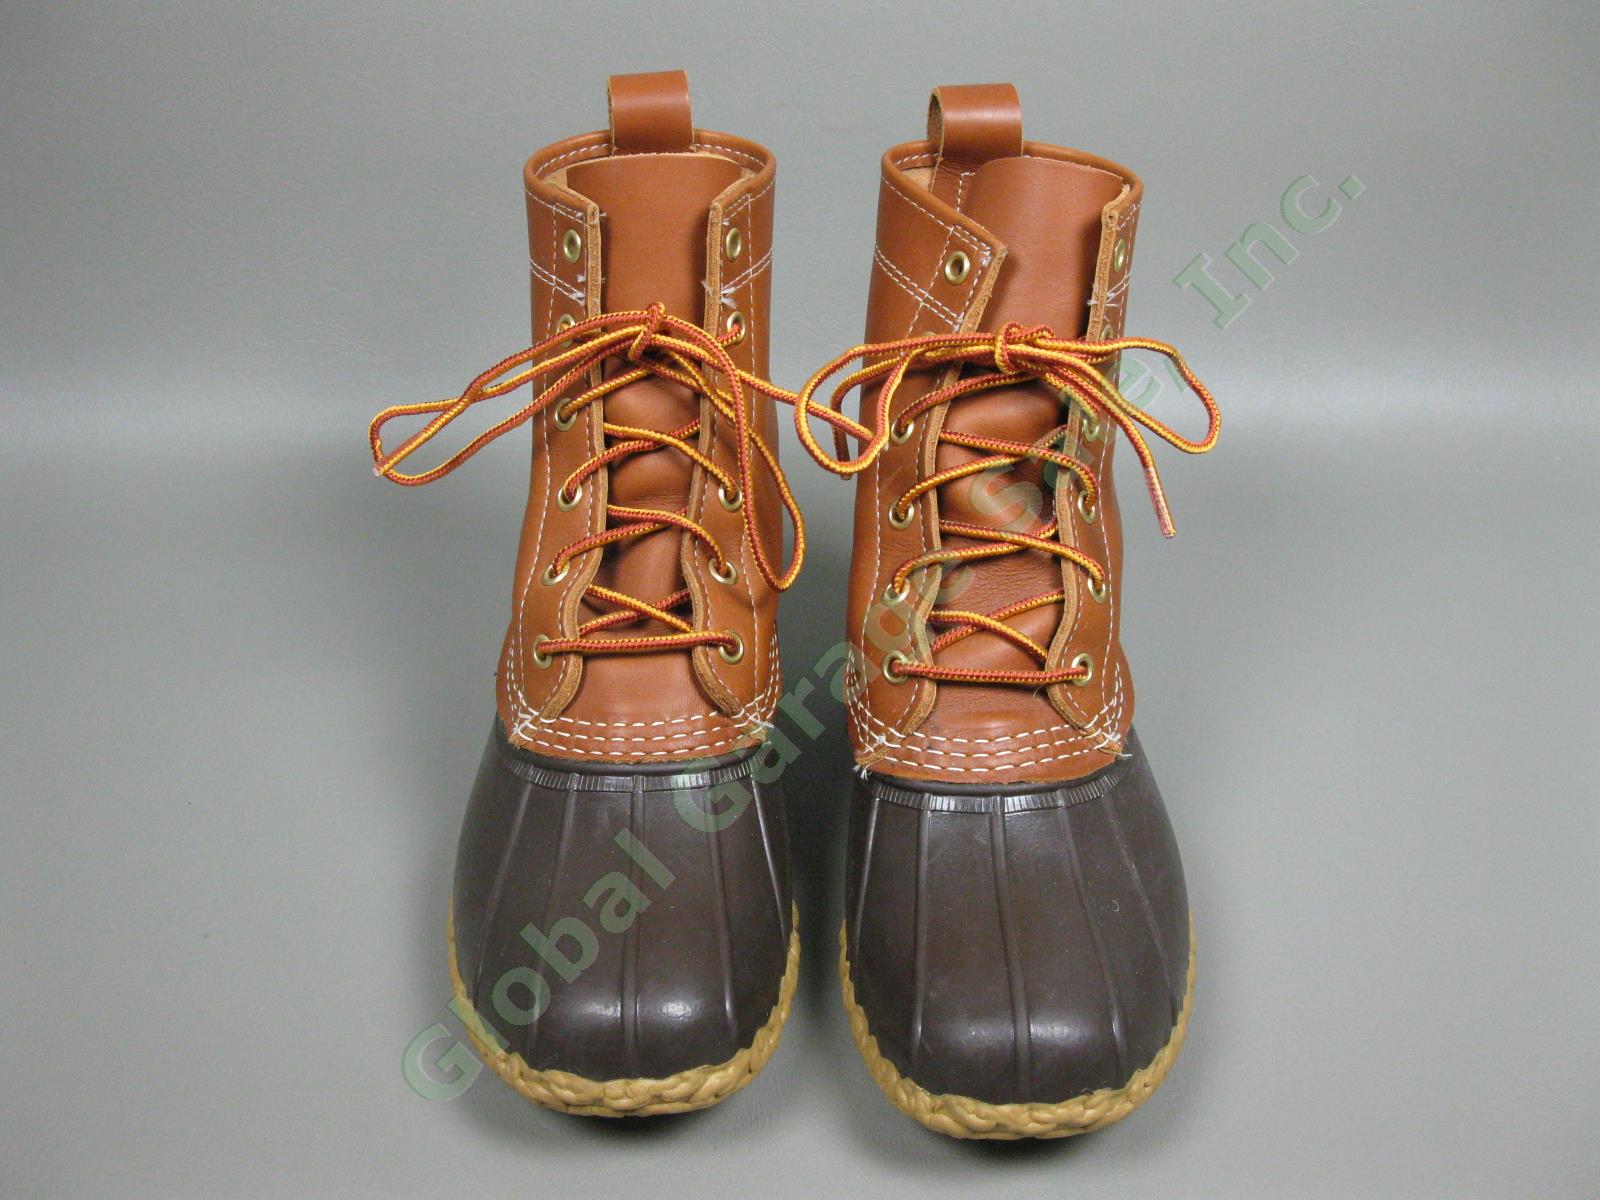 LL Bean Original Leather/Rubber 8" Duck Boots Womens Size 6 USA Made #06009 NR 1